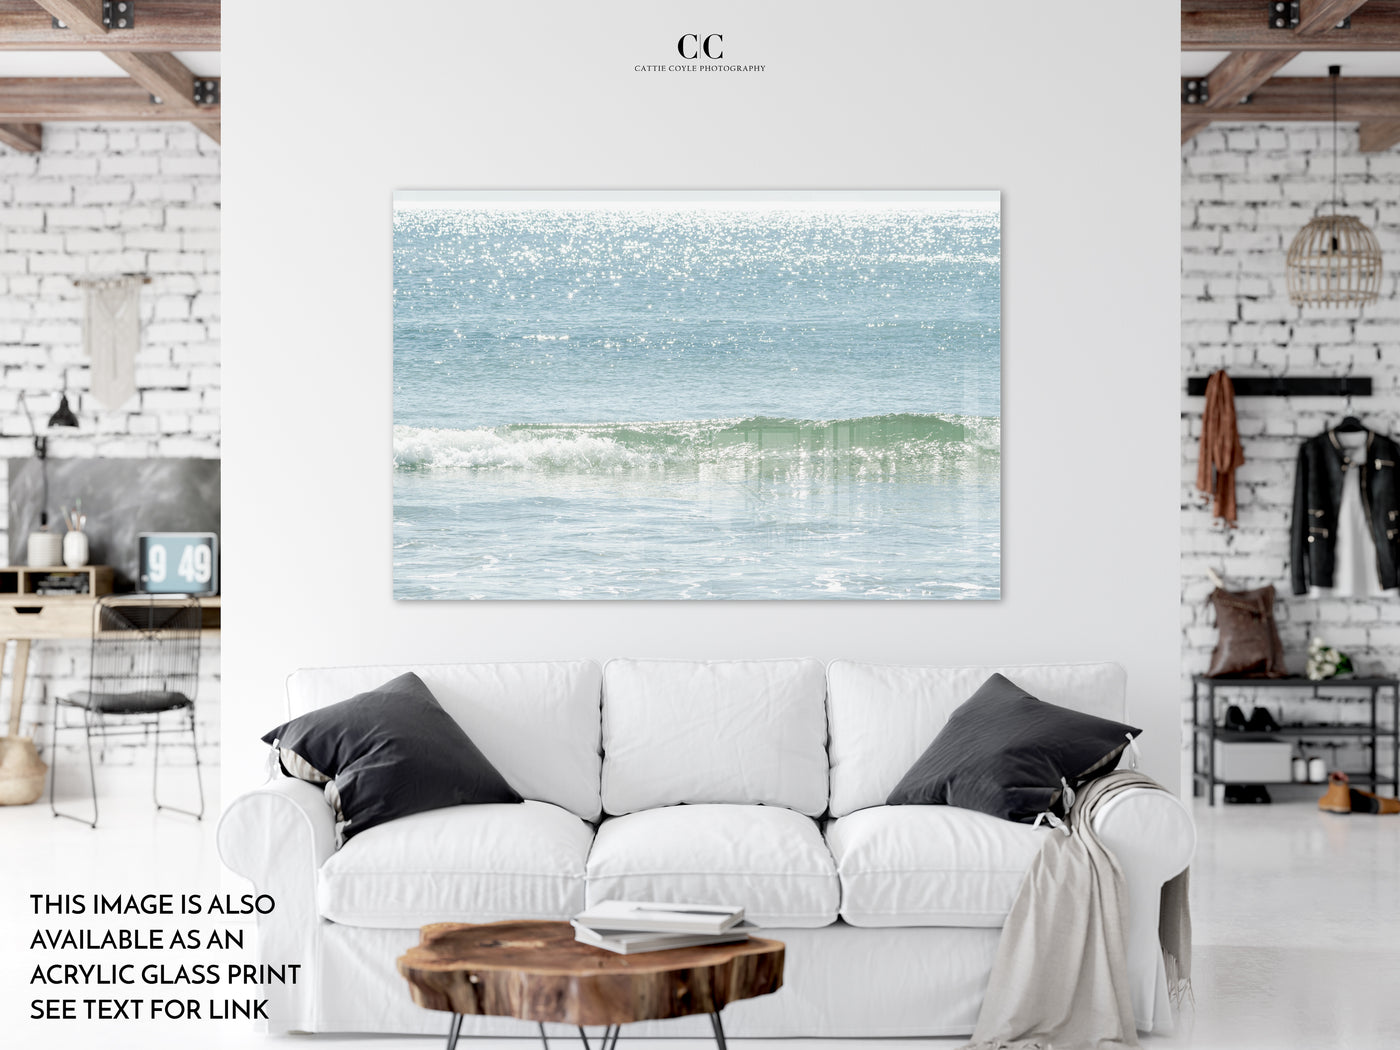 Ocean wave and sun glitter - Large acrylic glass art print by Cattie Coyle Photography above sofa